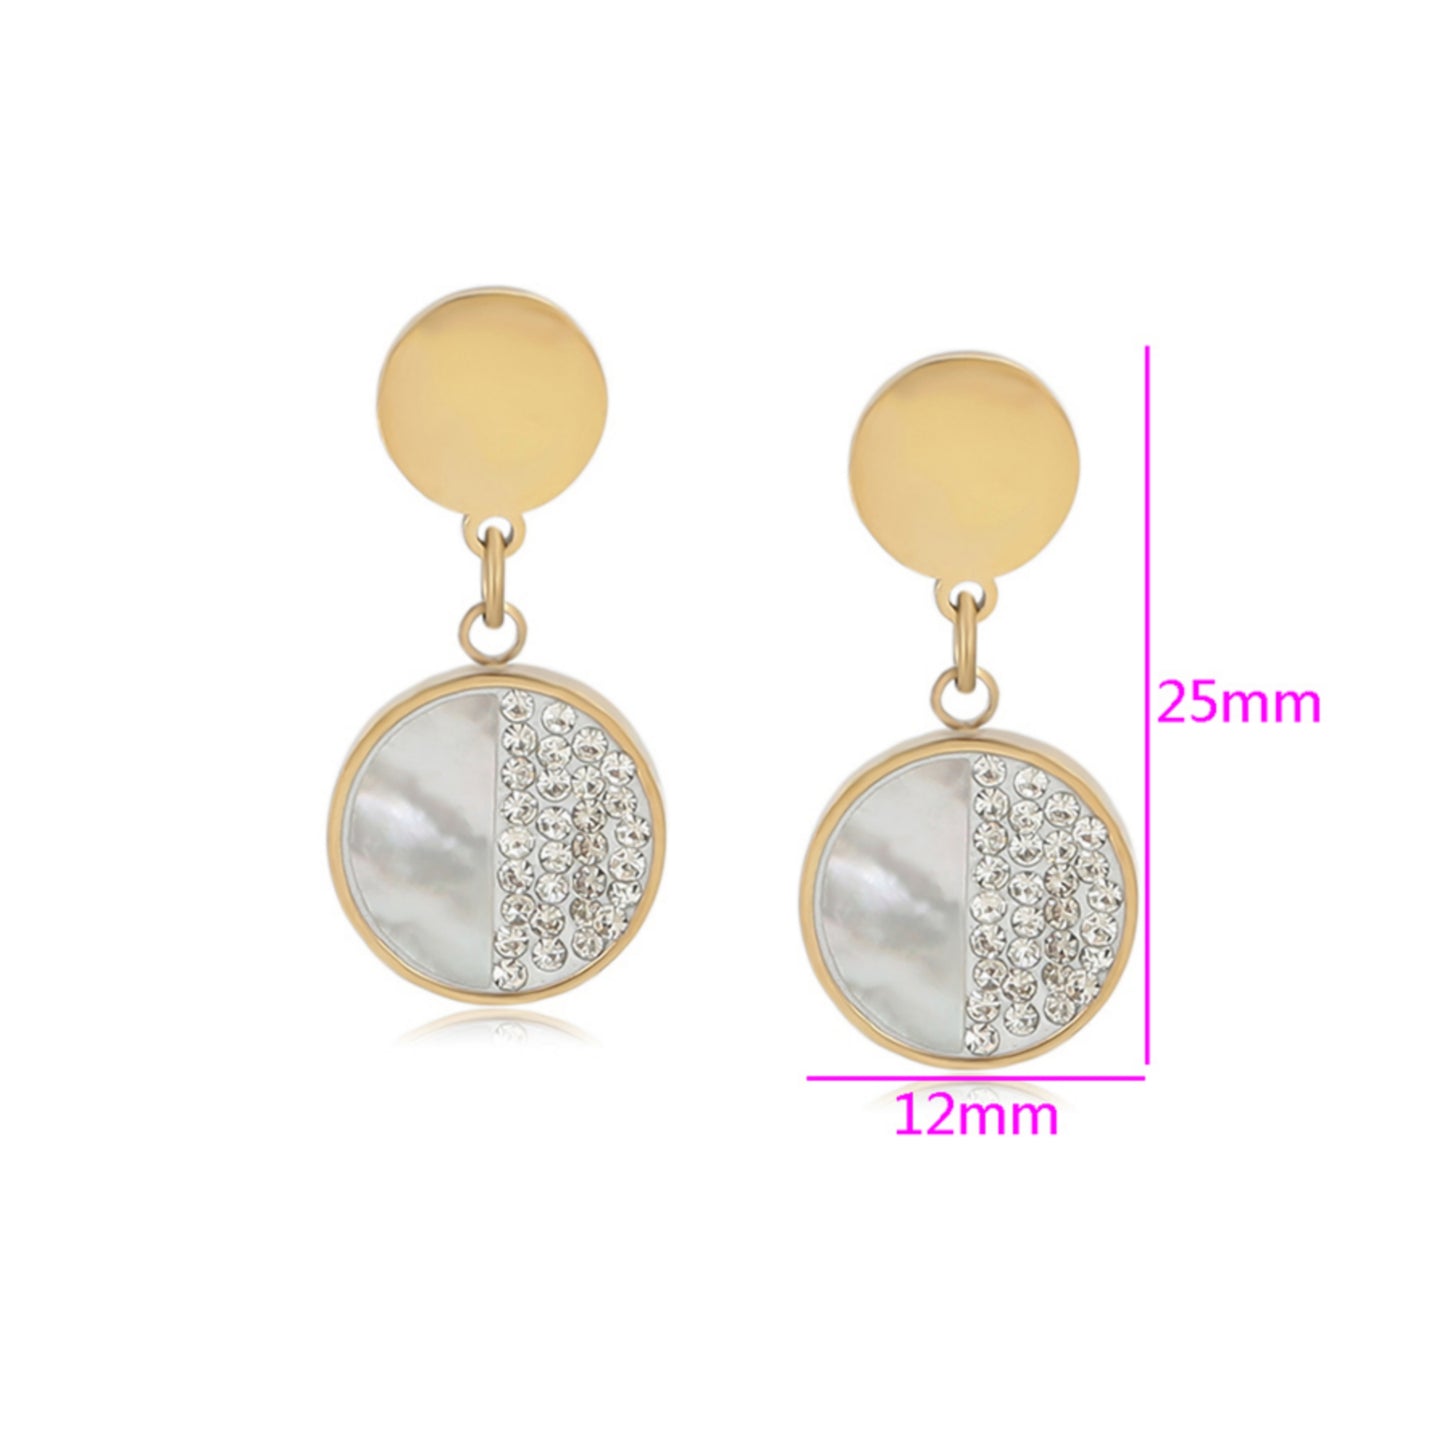 Surgical Steel Double Circle Post Earrings - HK Jewels